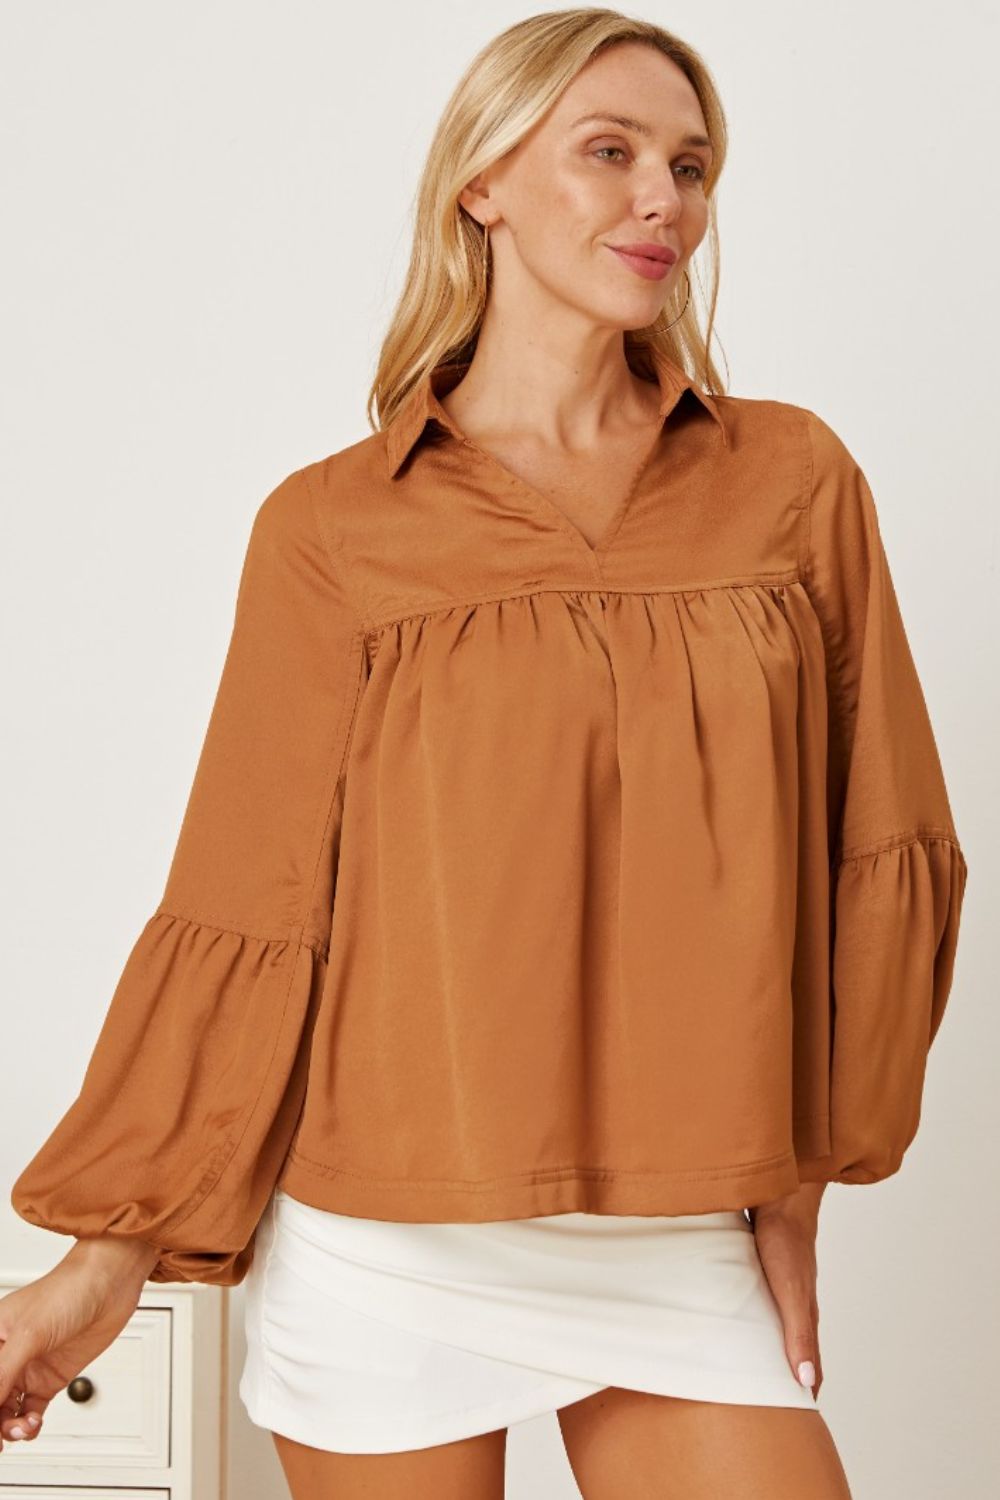 Balloon Sleeve Collared Neck Blouse - Women’s Clothing & Accessories - Shirts & Tops - 3 - 2024